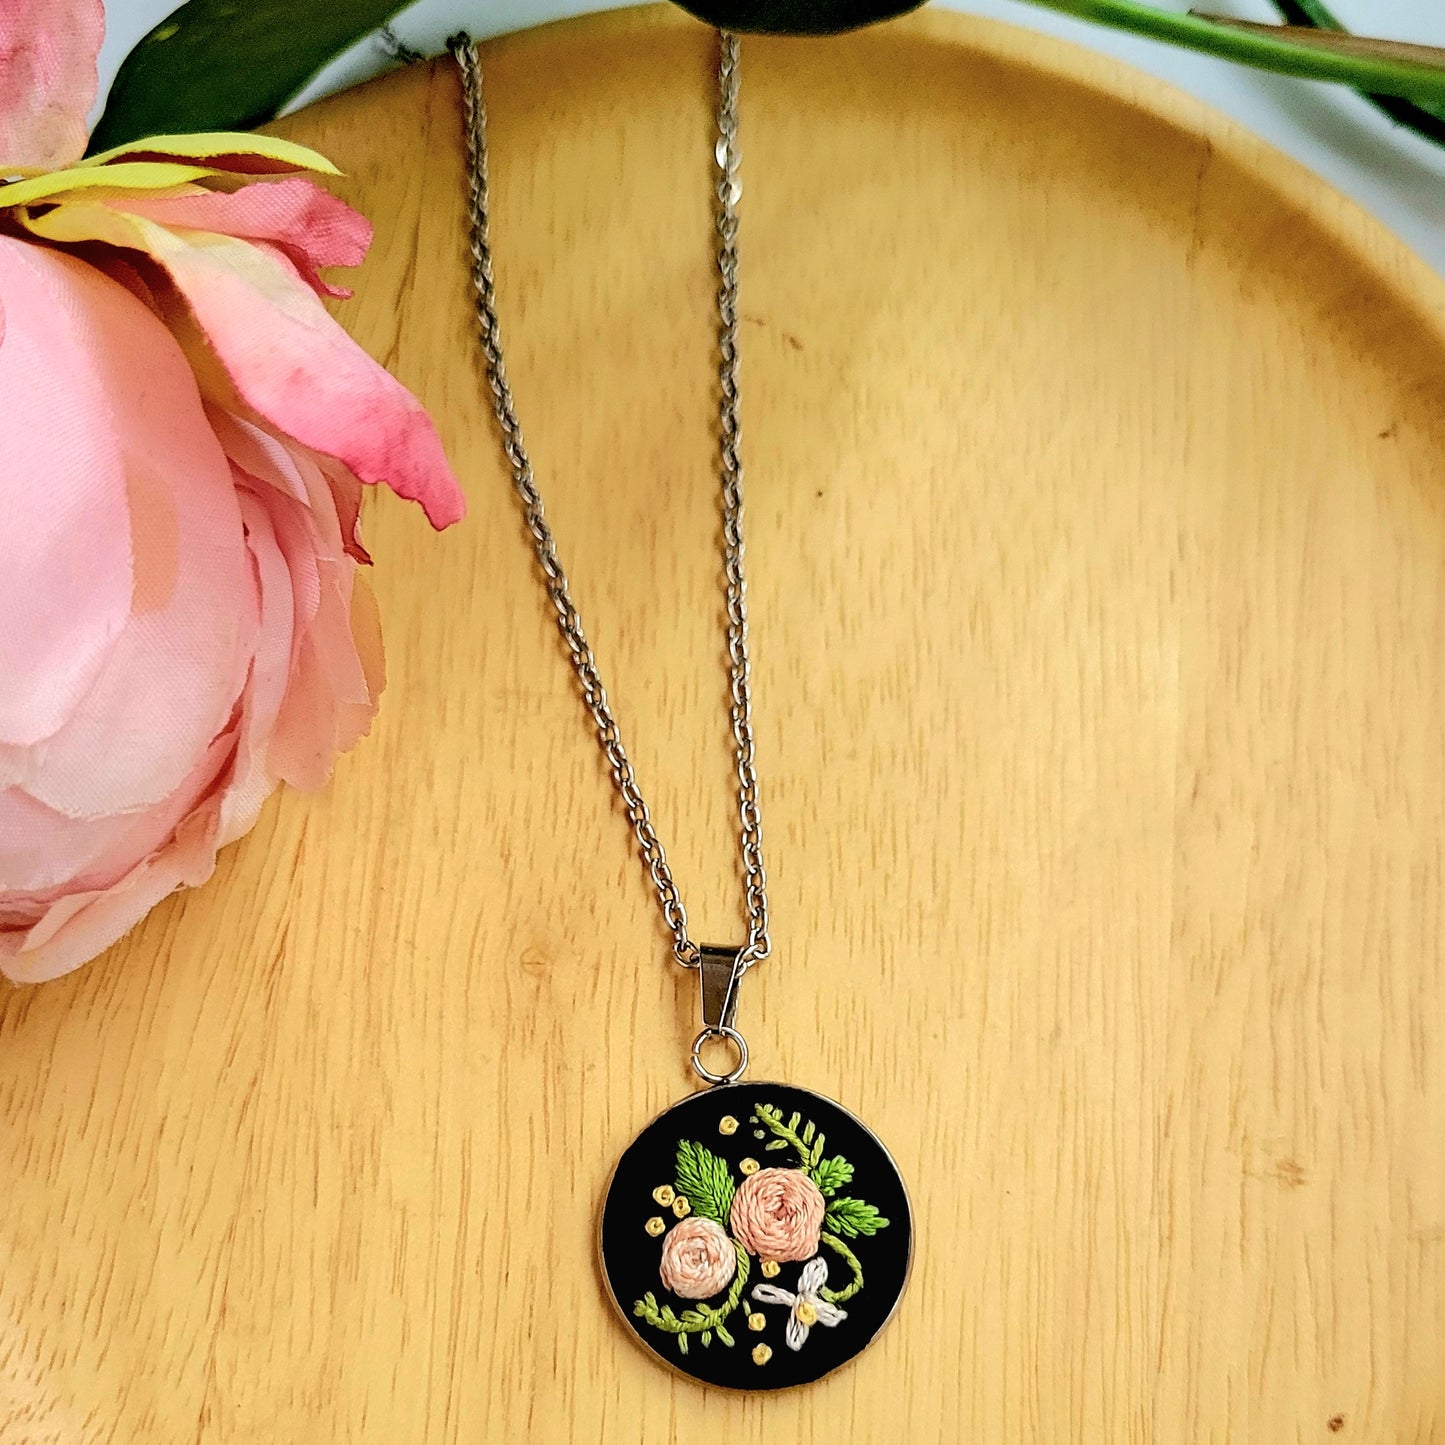 Hand Embroidered Floral Pendant Necklace-Stainless Steel